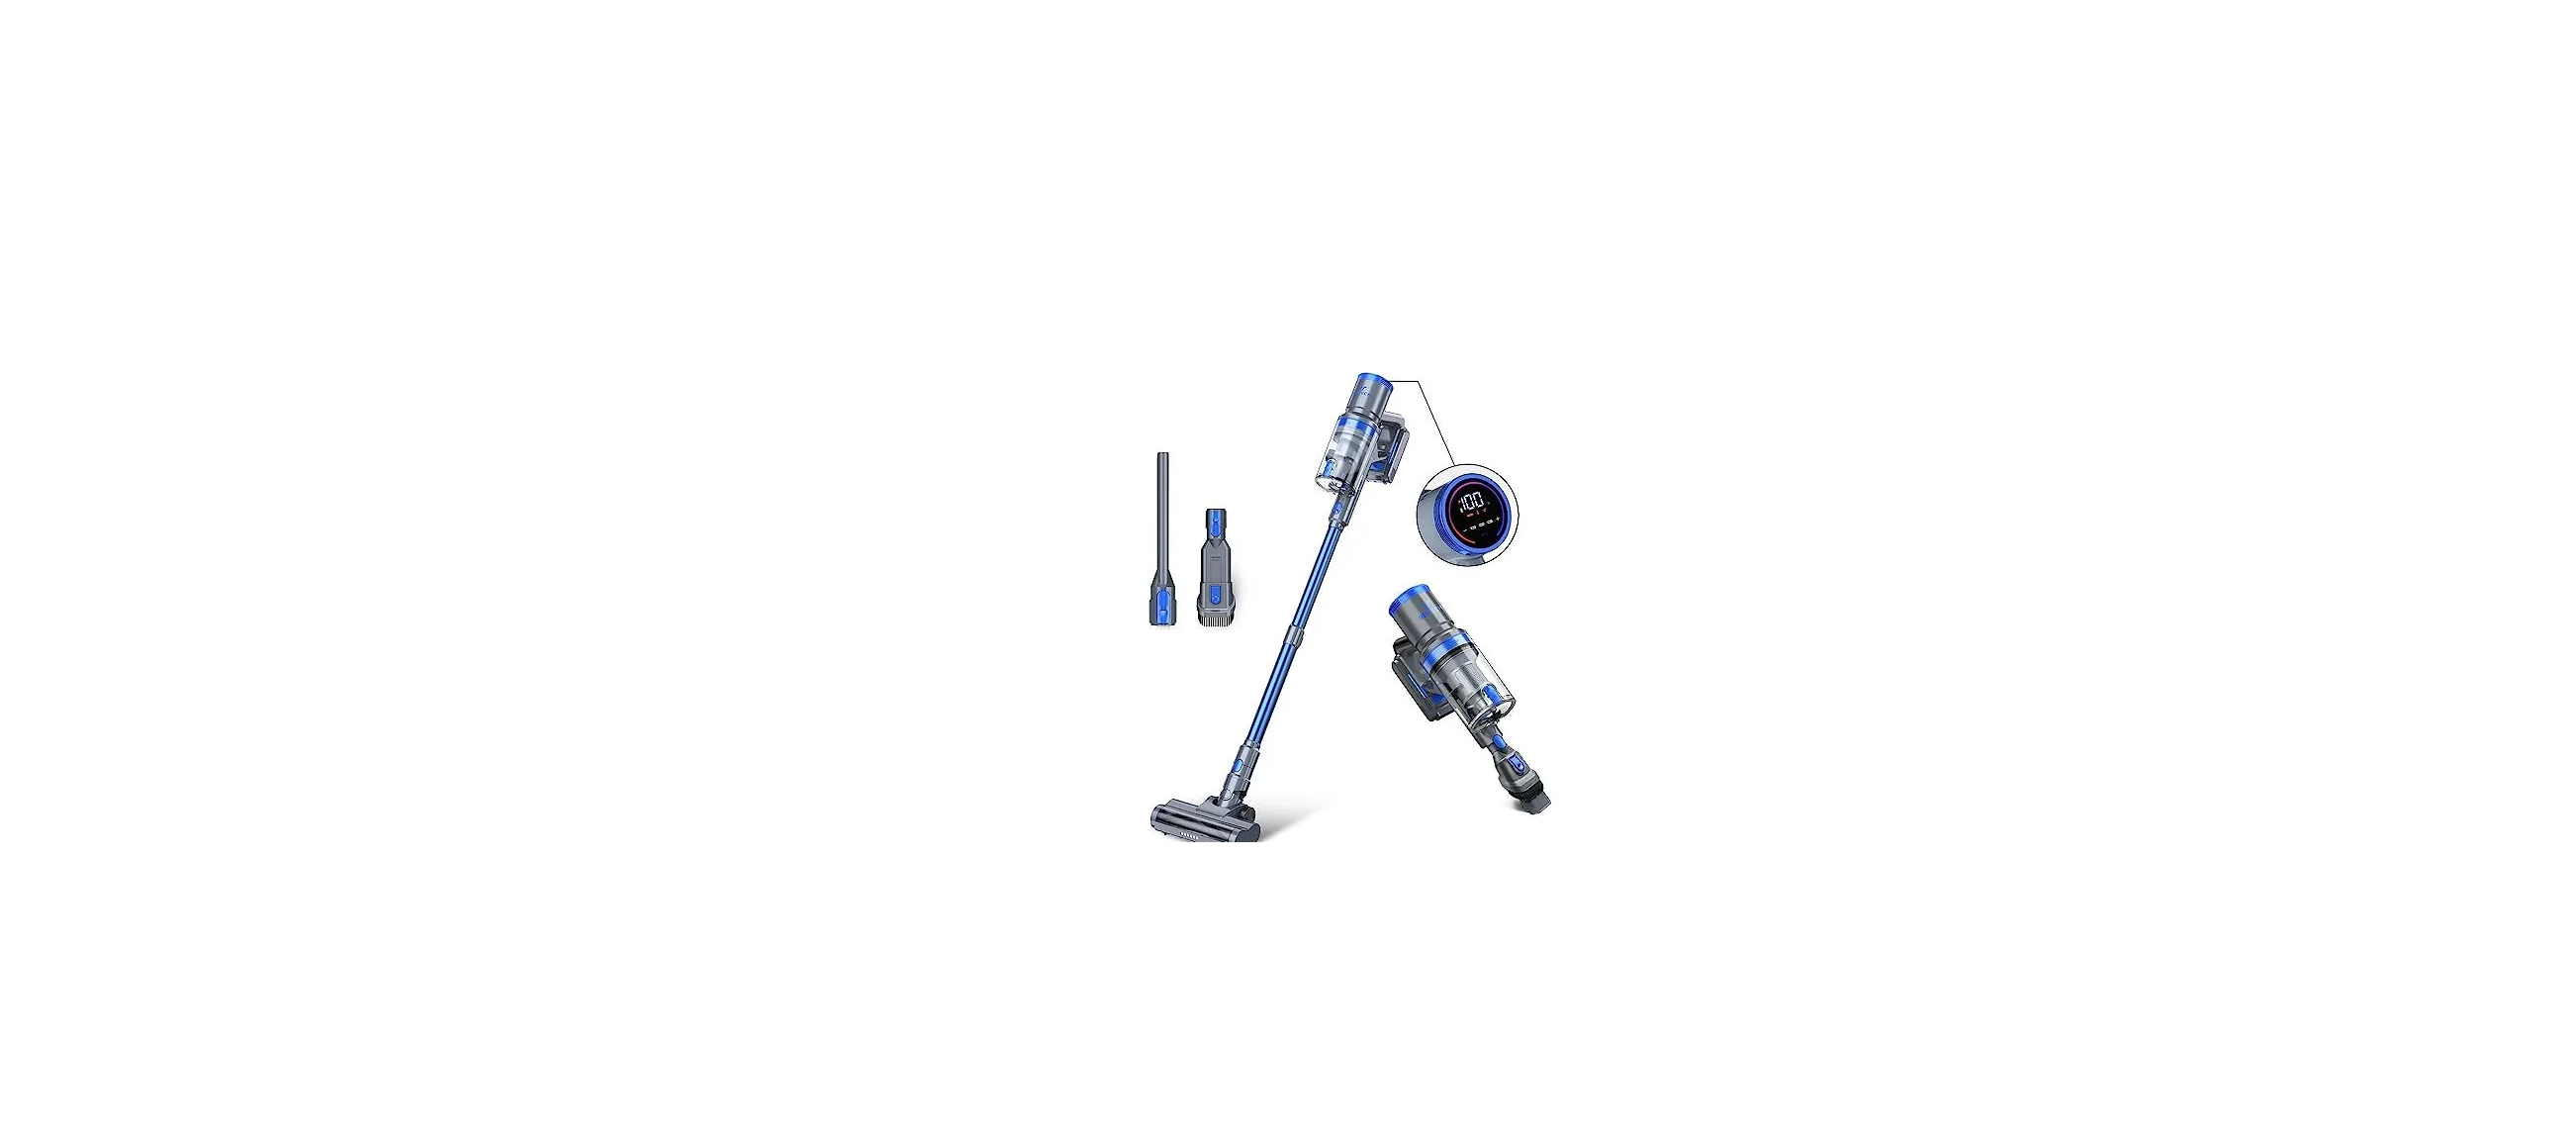 You are currently viewing Lubluelu KB-H009 Cordless Vacuum Cleaner User Manual